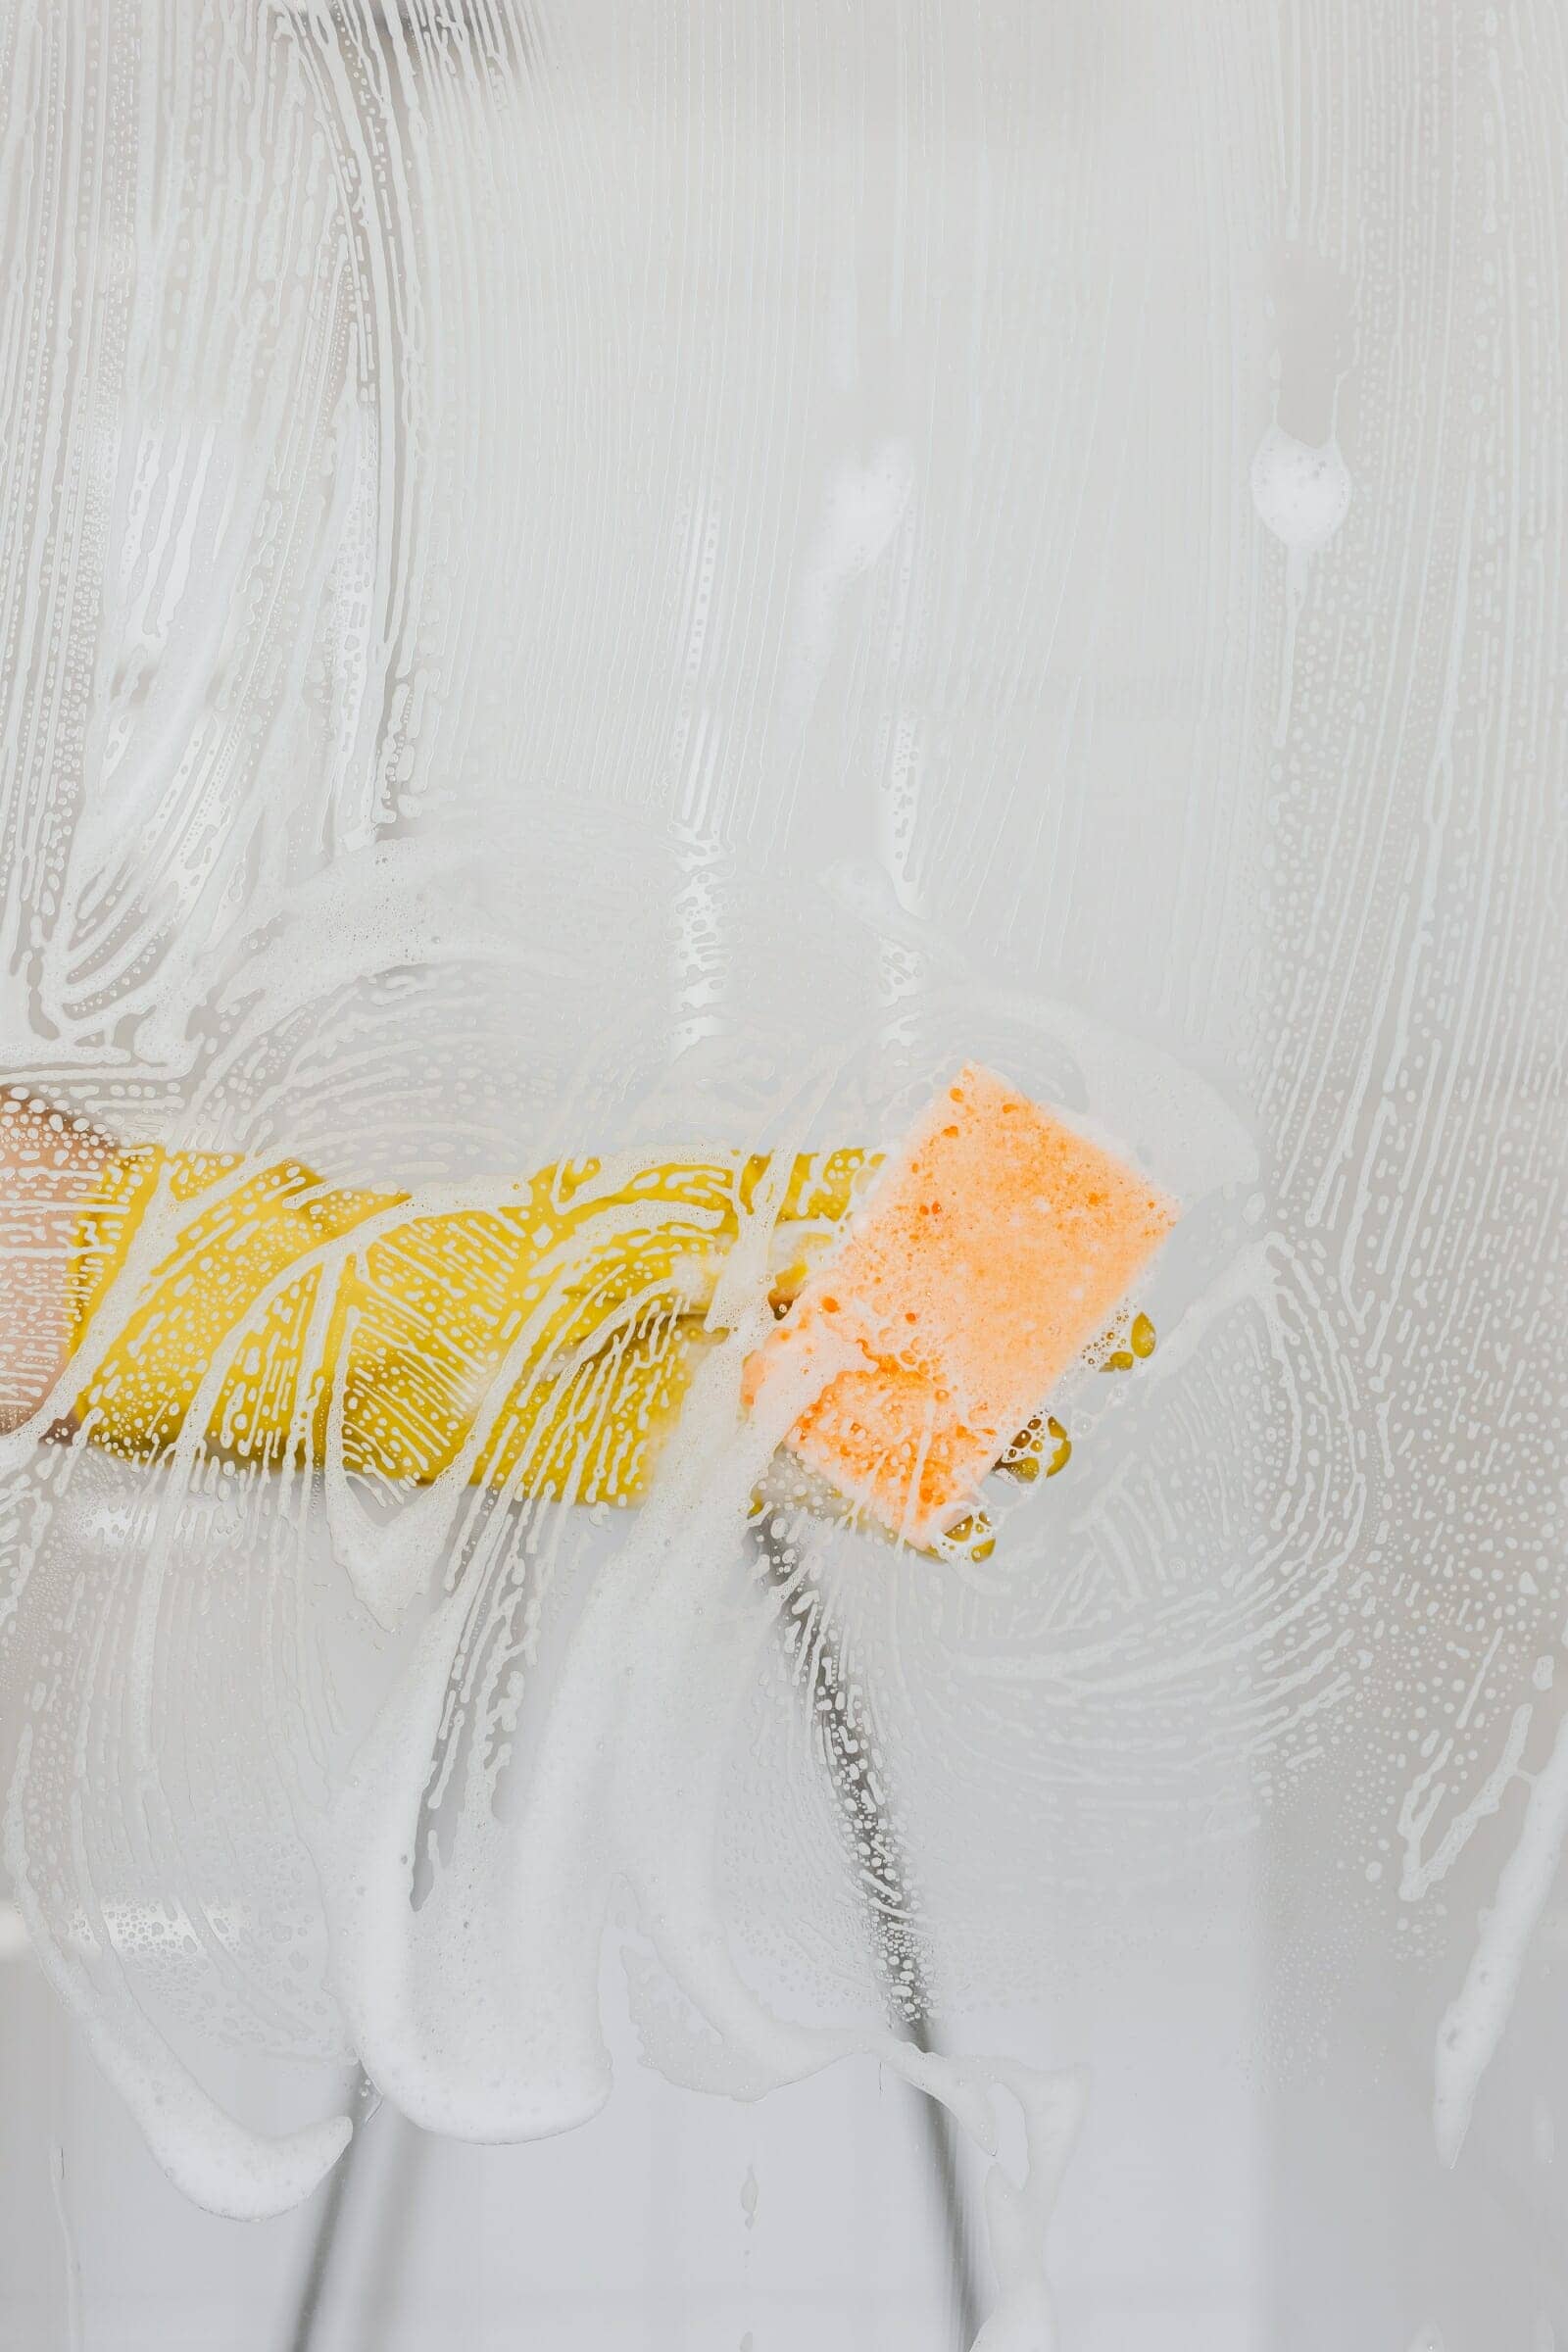 Cleaning a shower screen with sponge and yellow rubber gloves